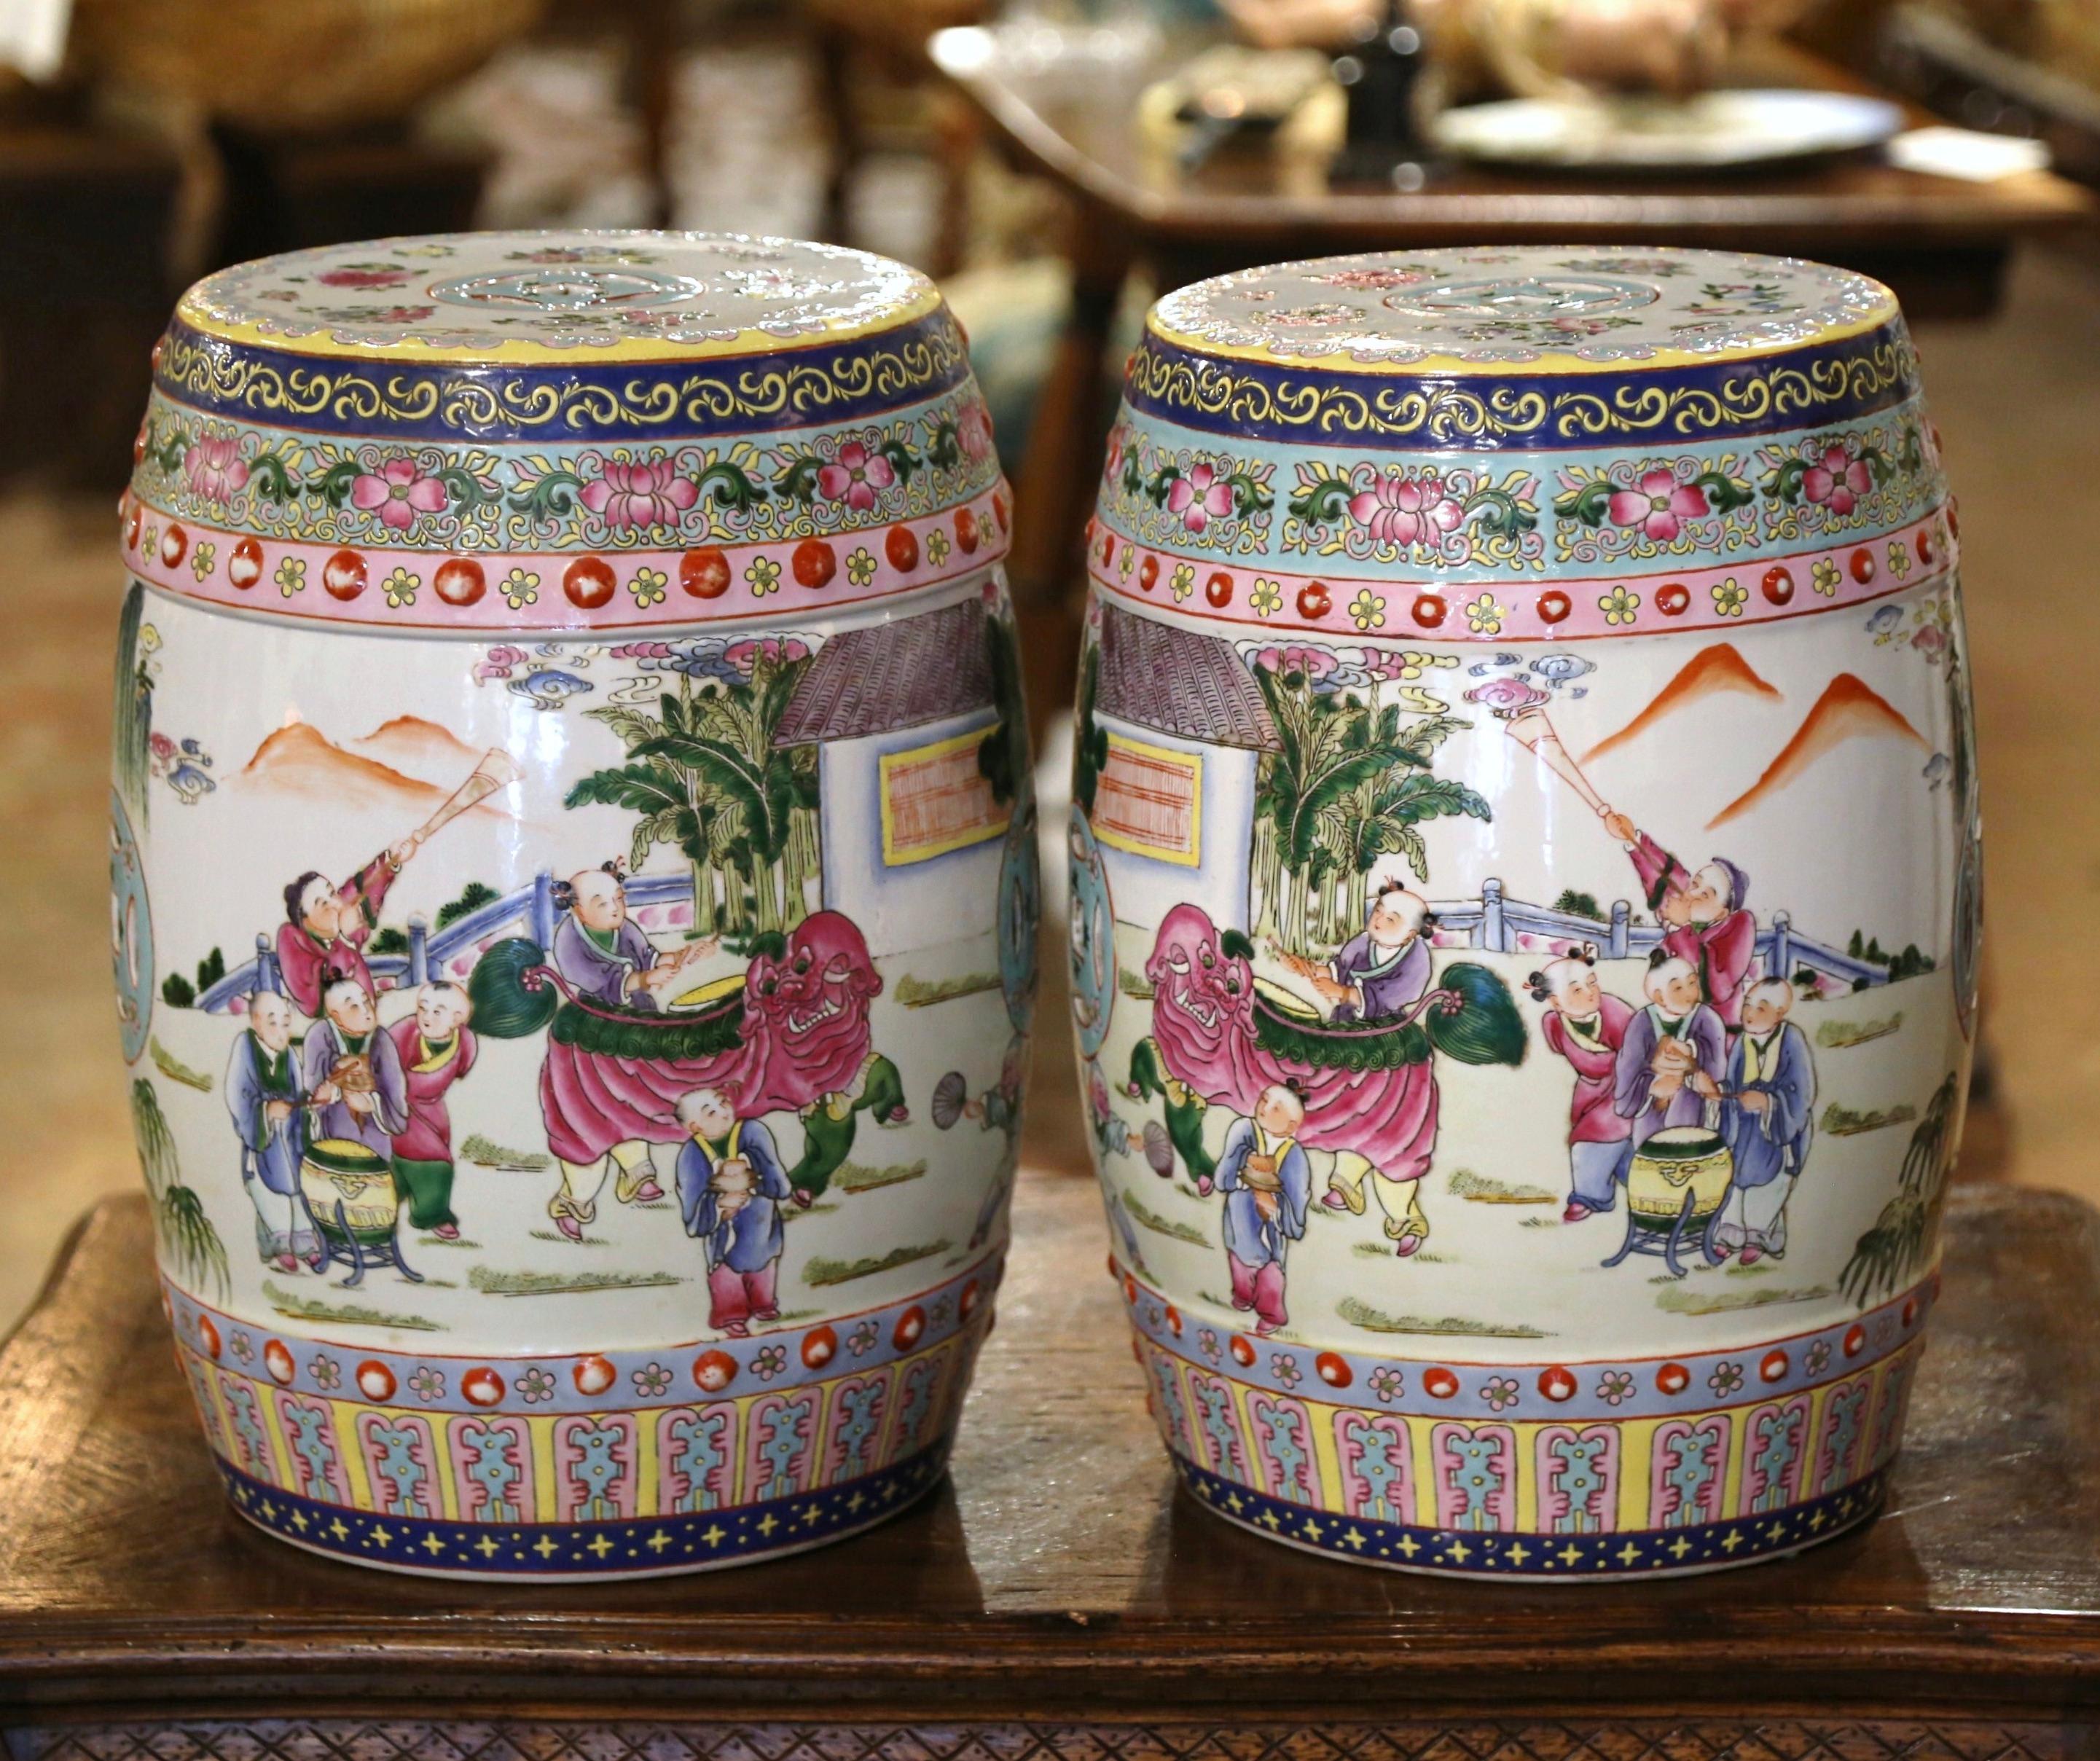 Decorate a den or a living room with this pair of colorful polychrome garden stools. Created in China, circa 1970 and round in shape, the vintage porcelain seats are pierced on the top and around the perimeter for an intricate, sculptural effect.